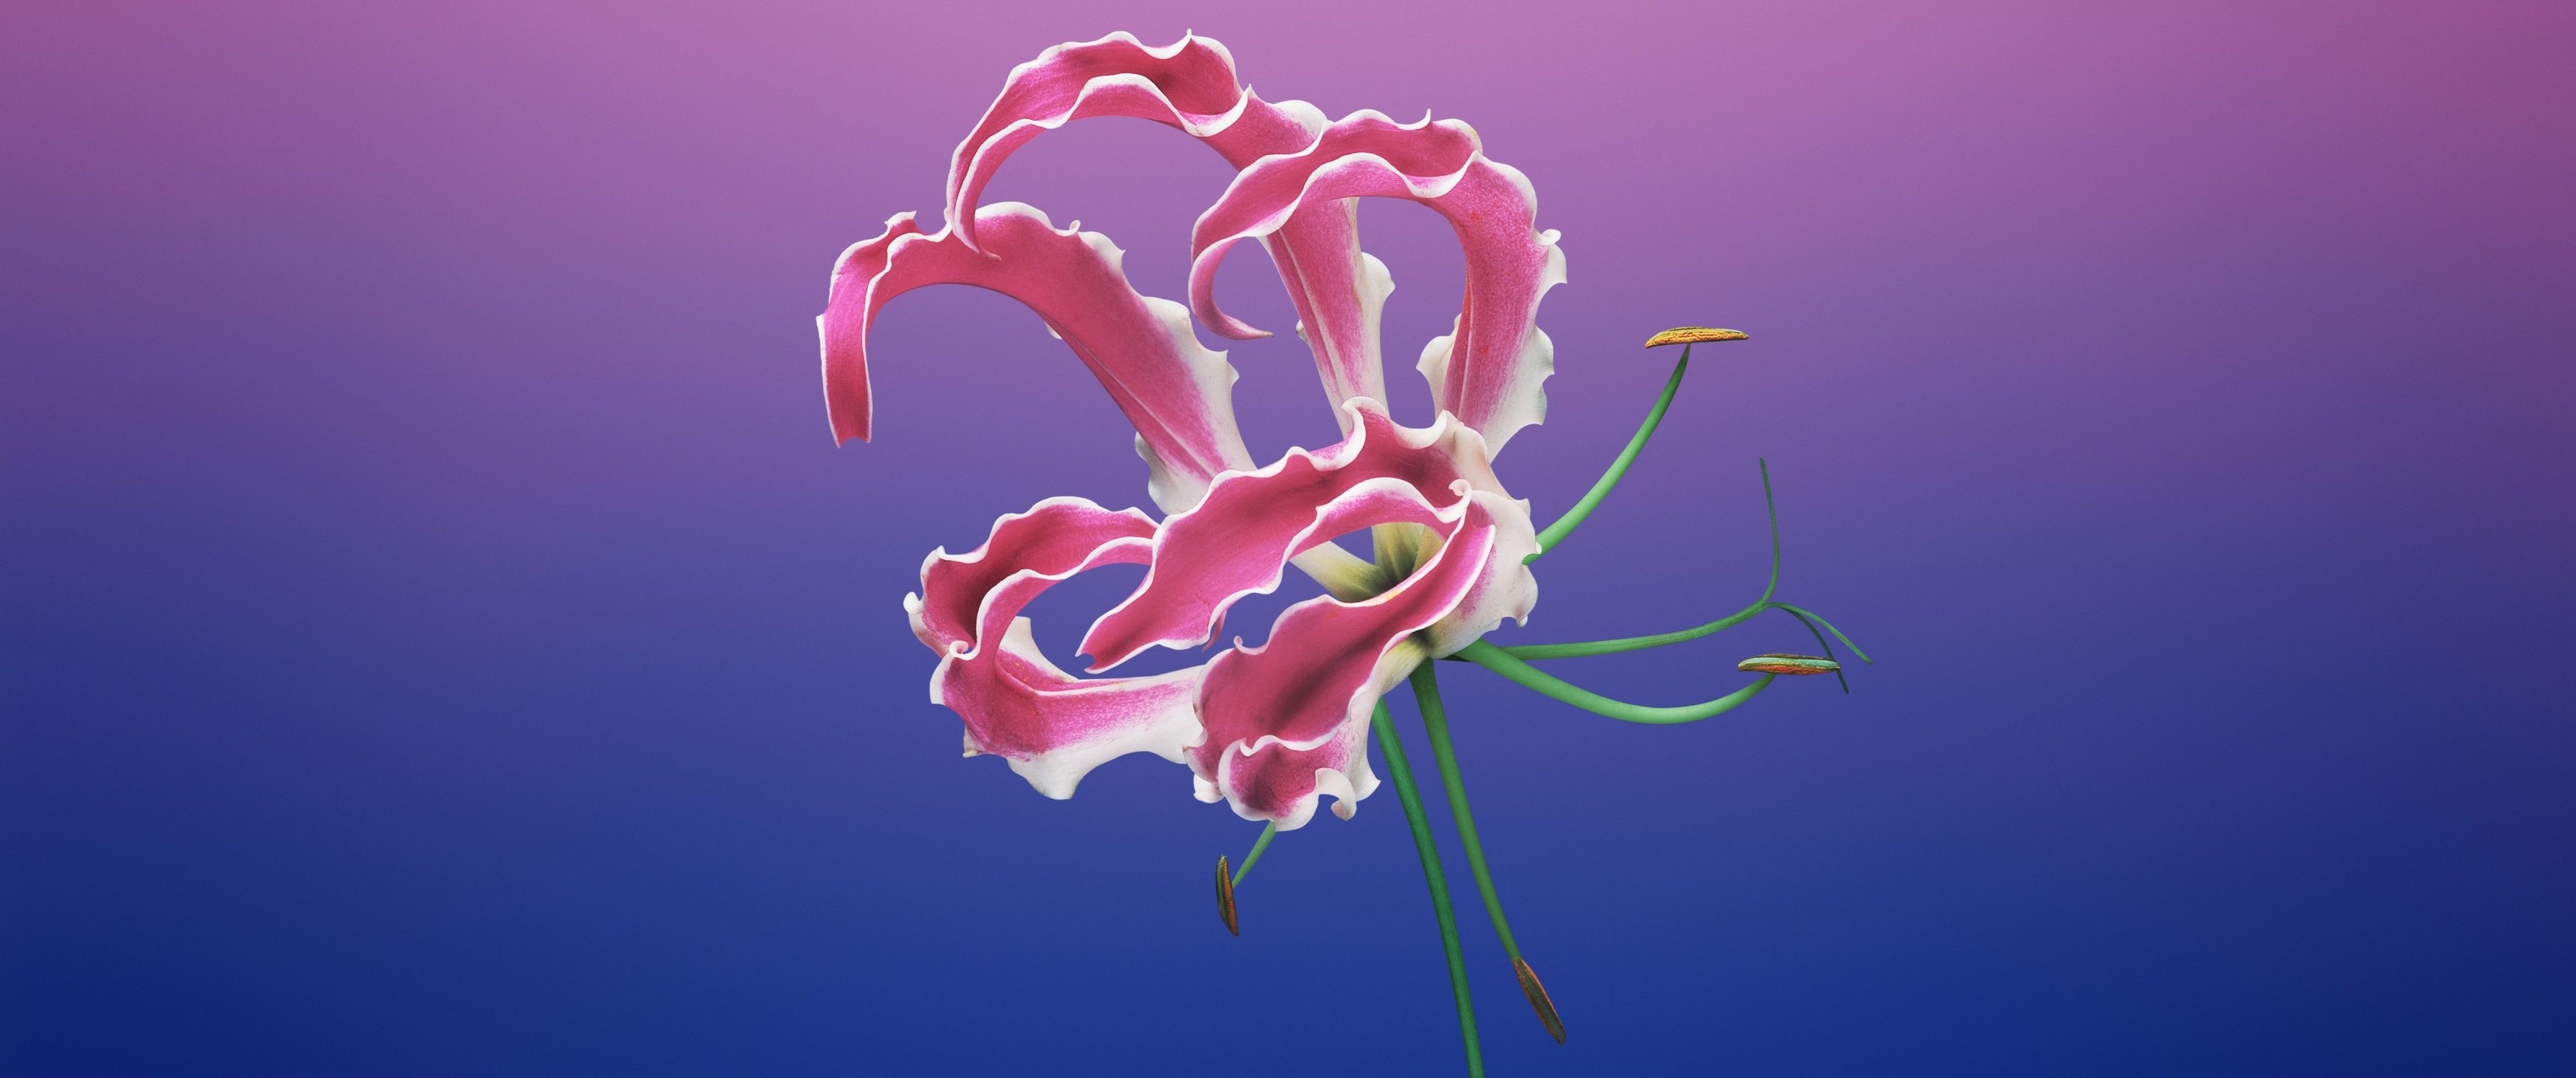 A pink and white flower on a purple and blue background - 3440x1440